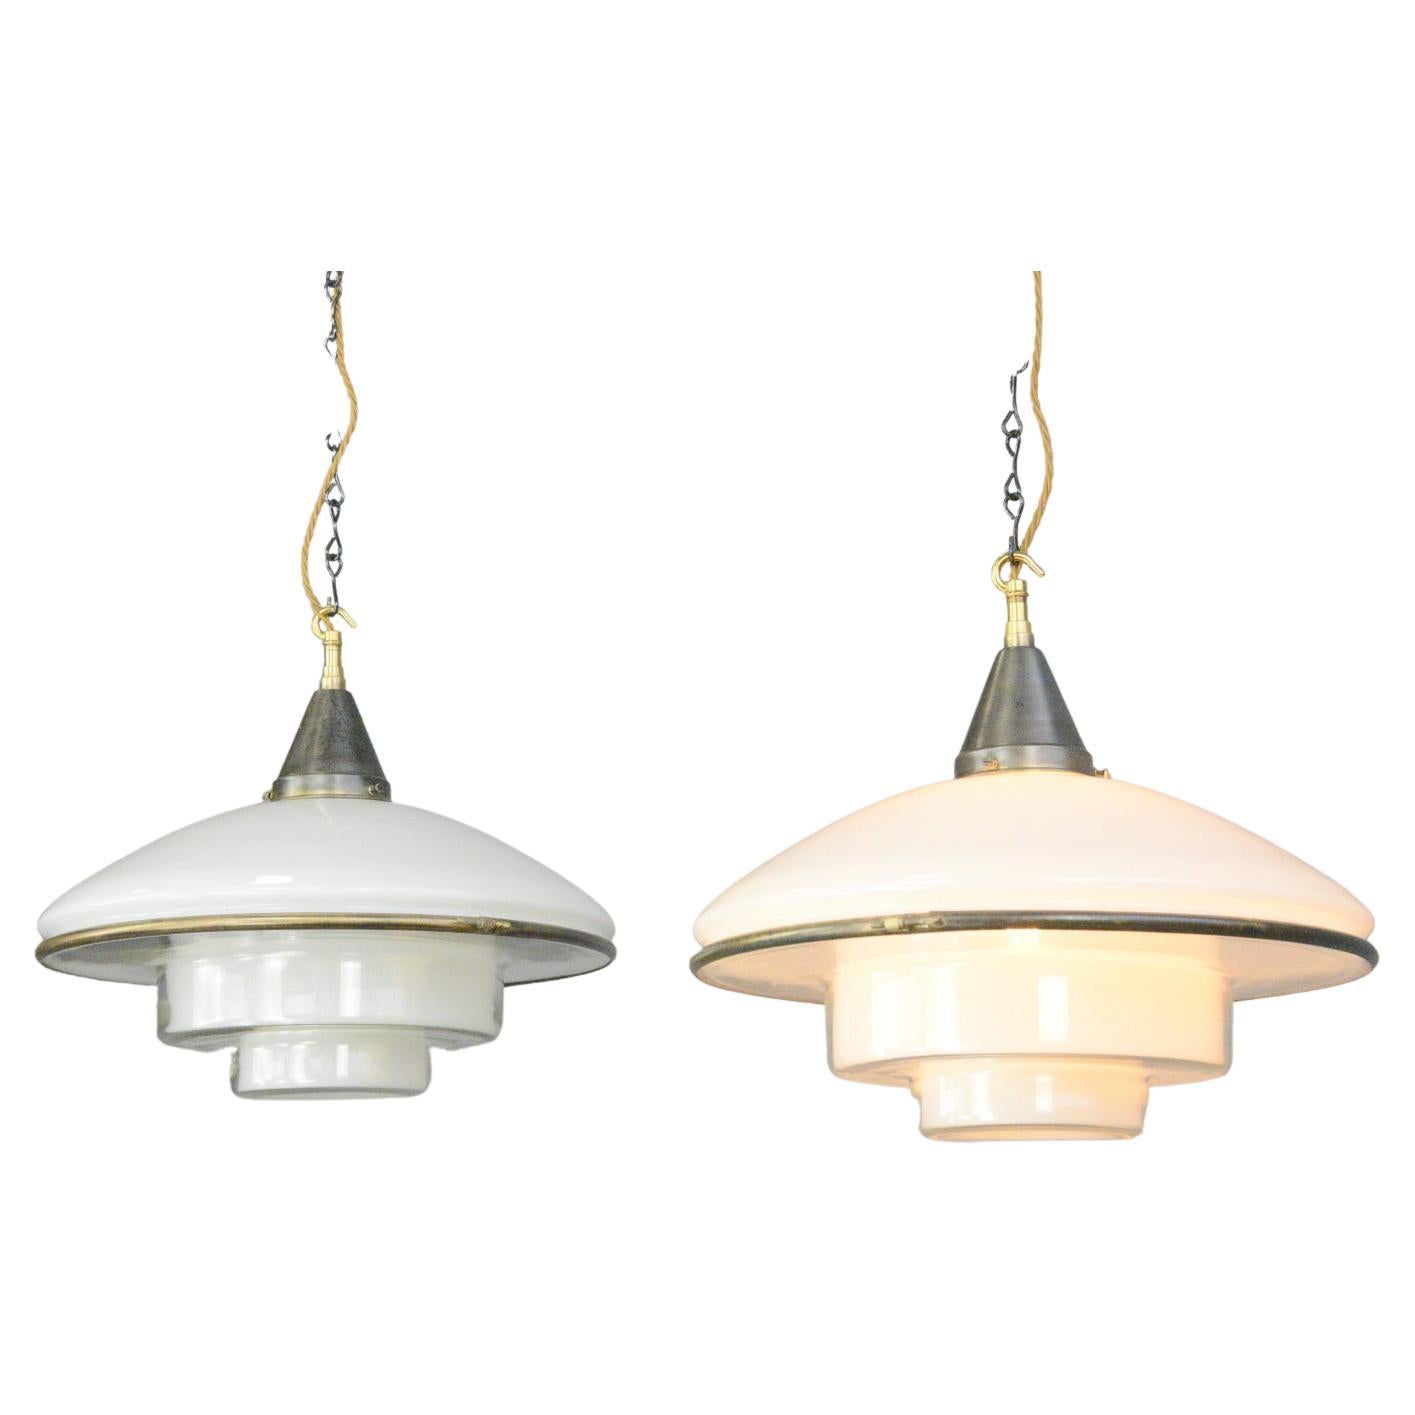 Sistrah P4 Pendant Lights by Otto Muller Circa 1930s For Sale